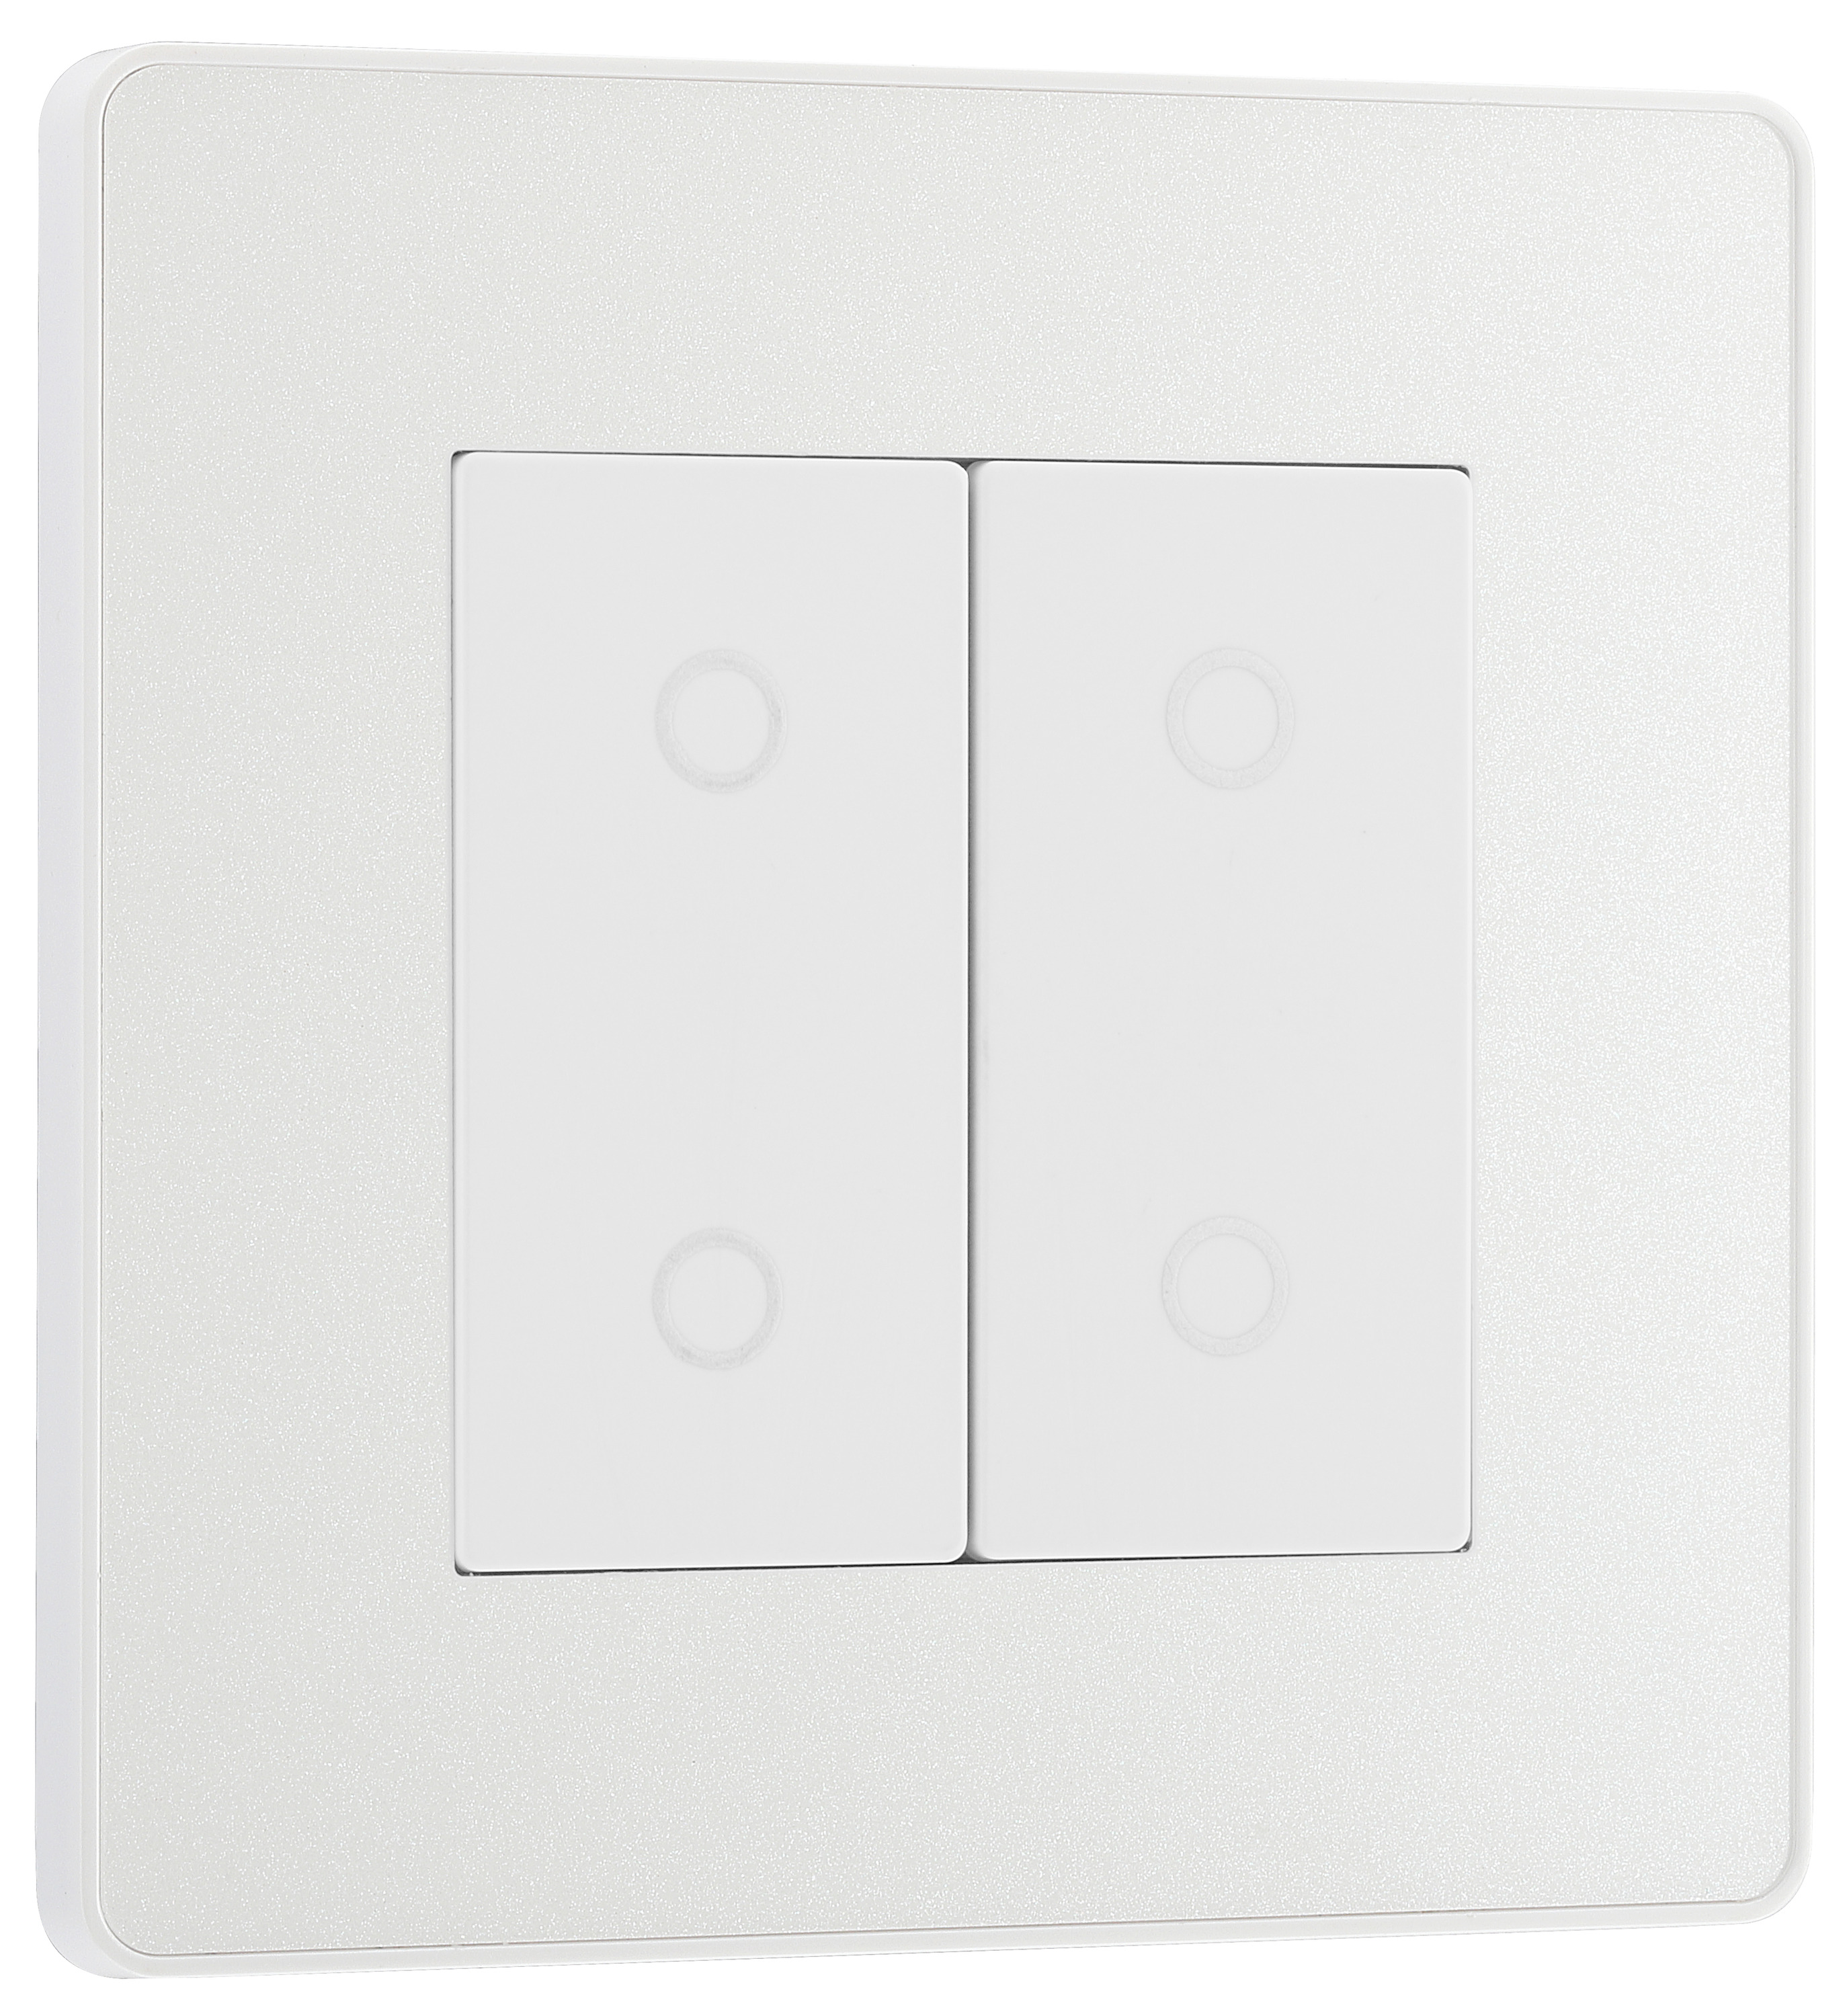 BG Evolve Pearlescent White 2 Way Secondary Double Touch Dimmer Switch - 200W